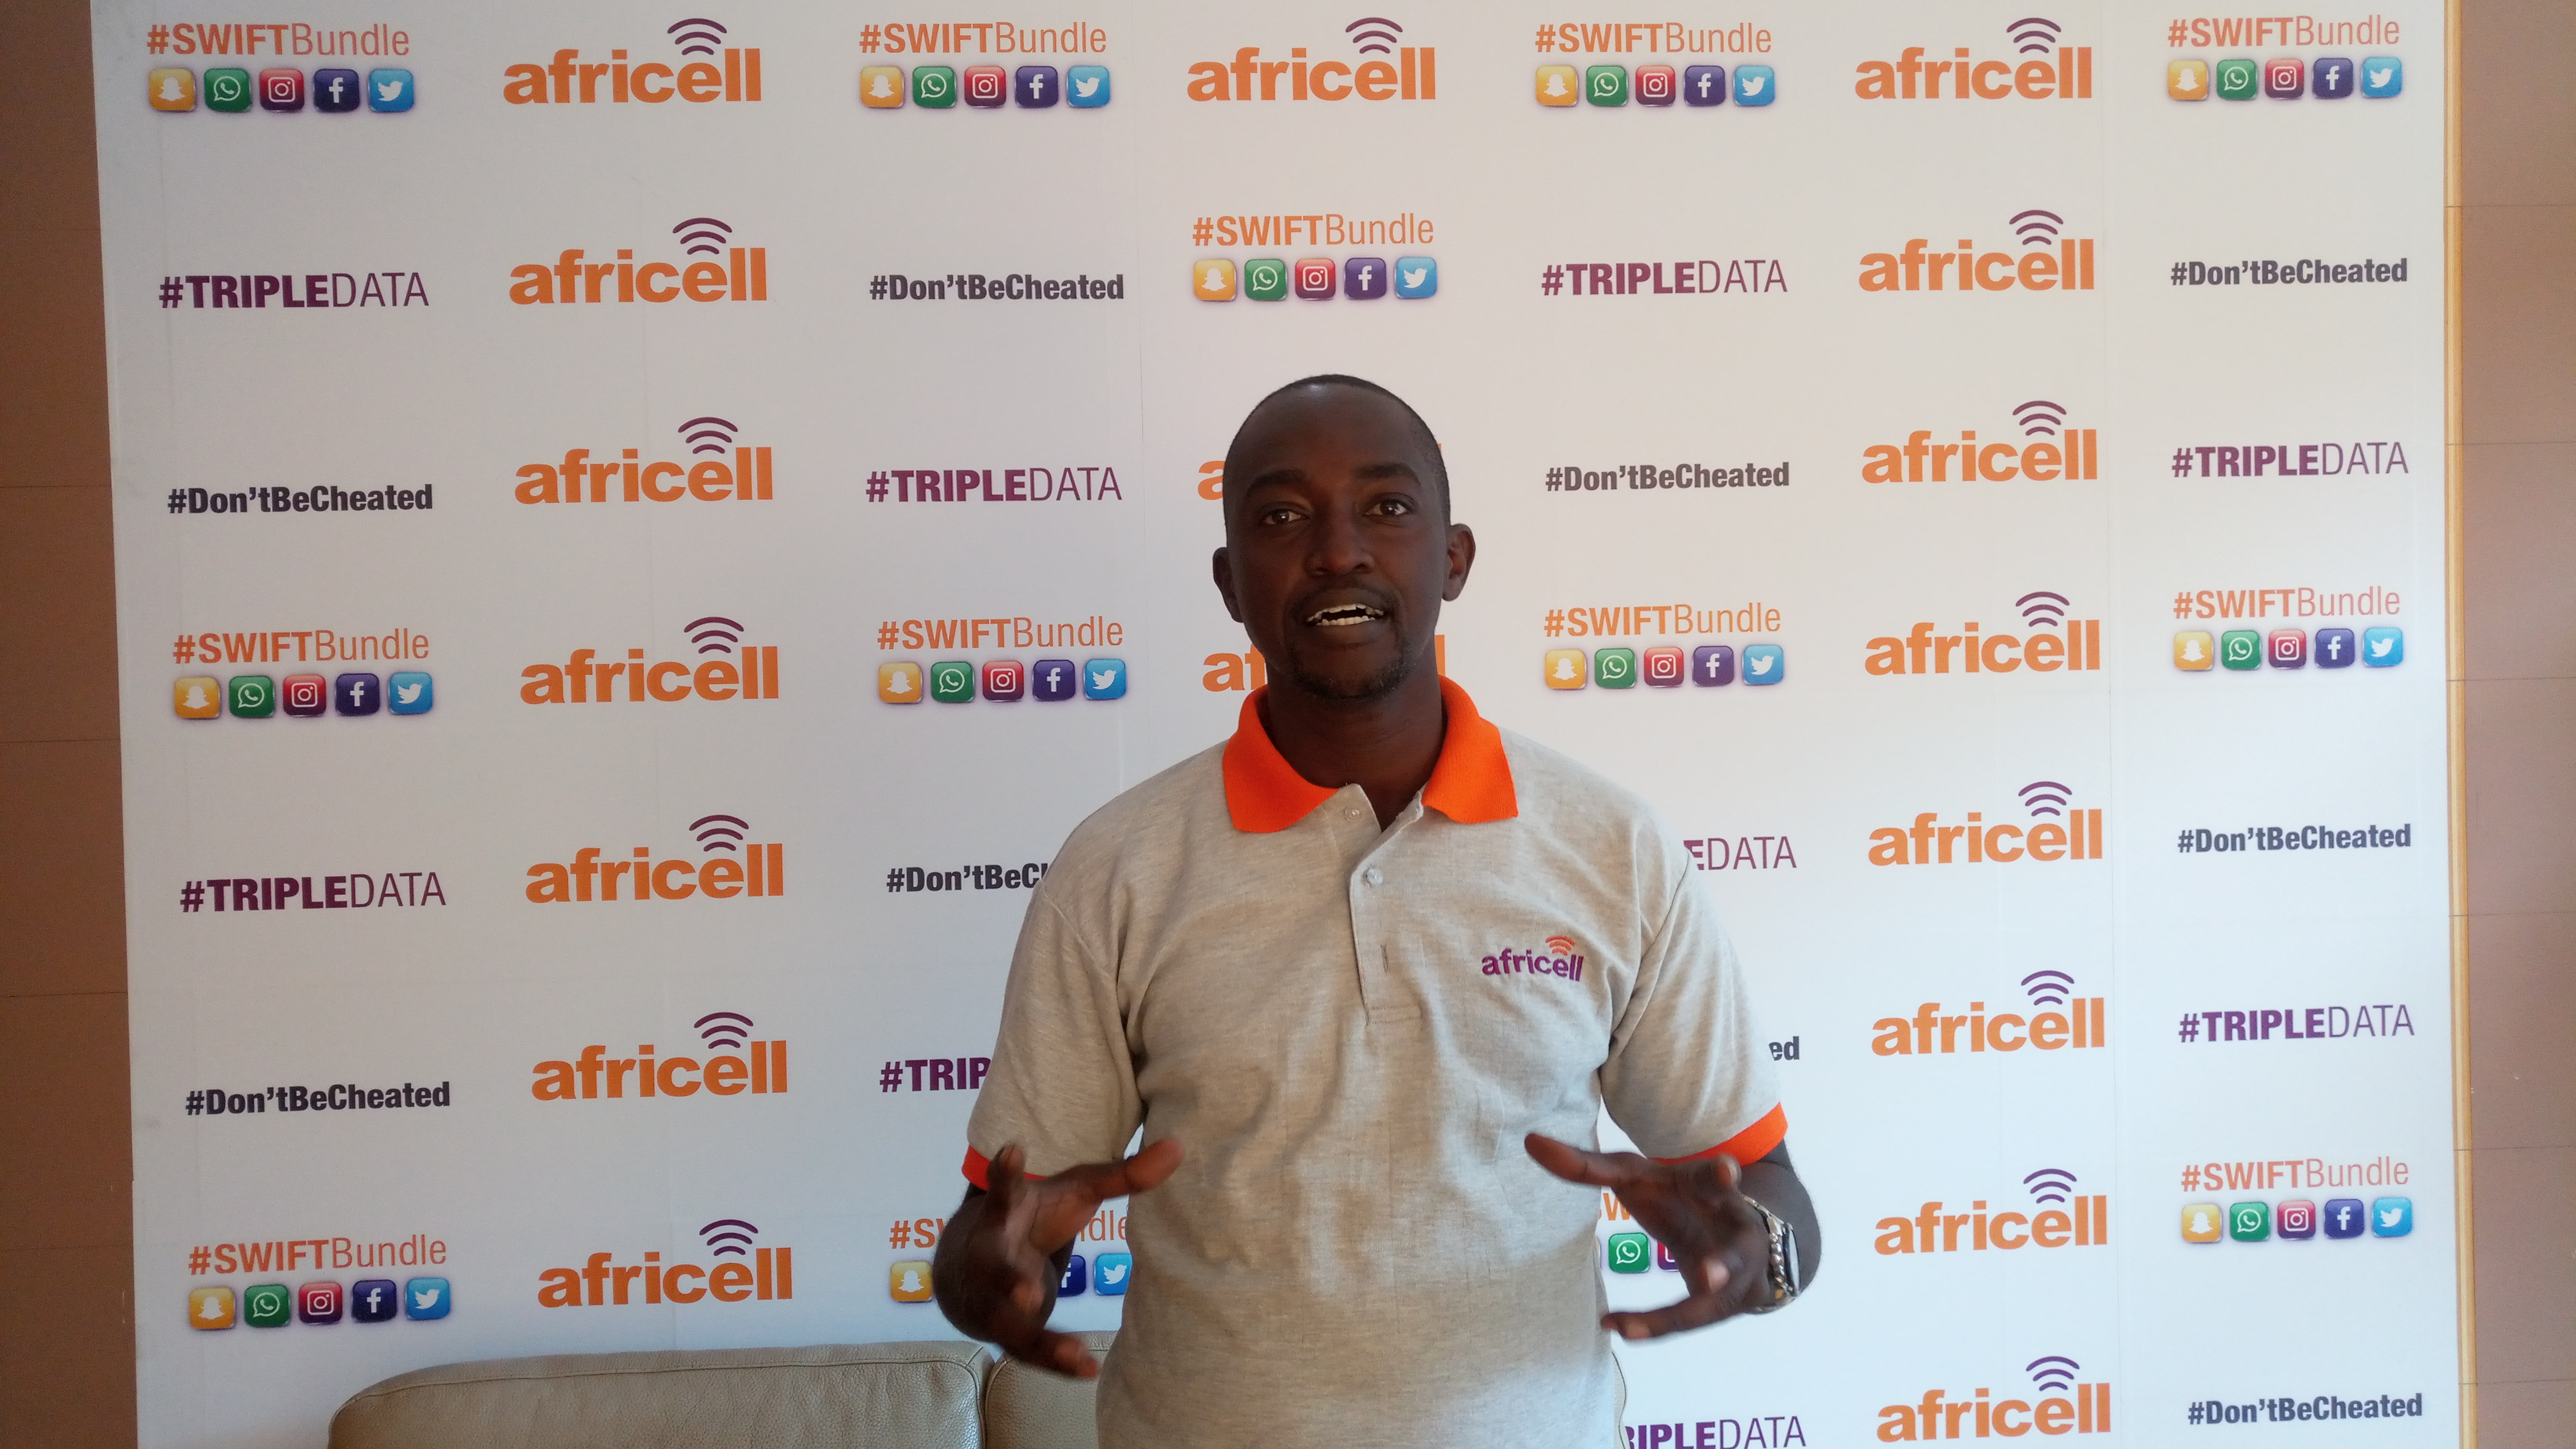 Africell Launches New Bundle with Voice, SMS, Data Packages